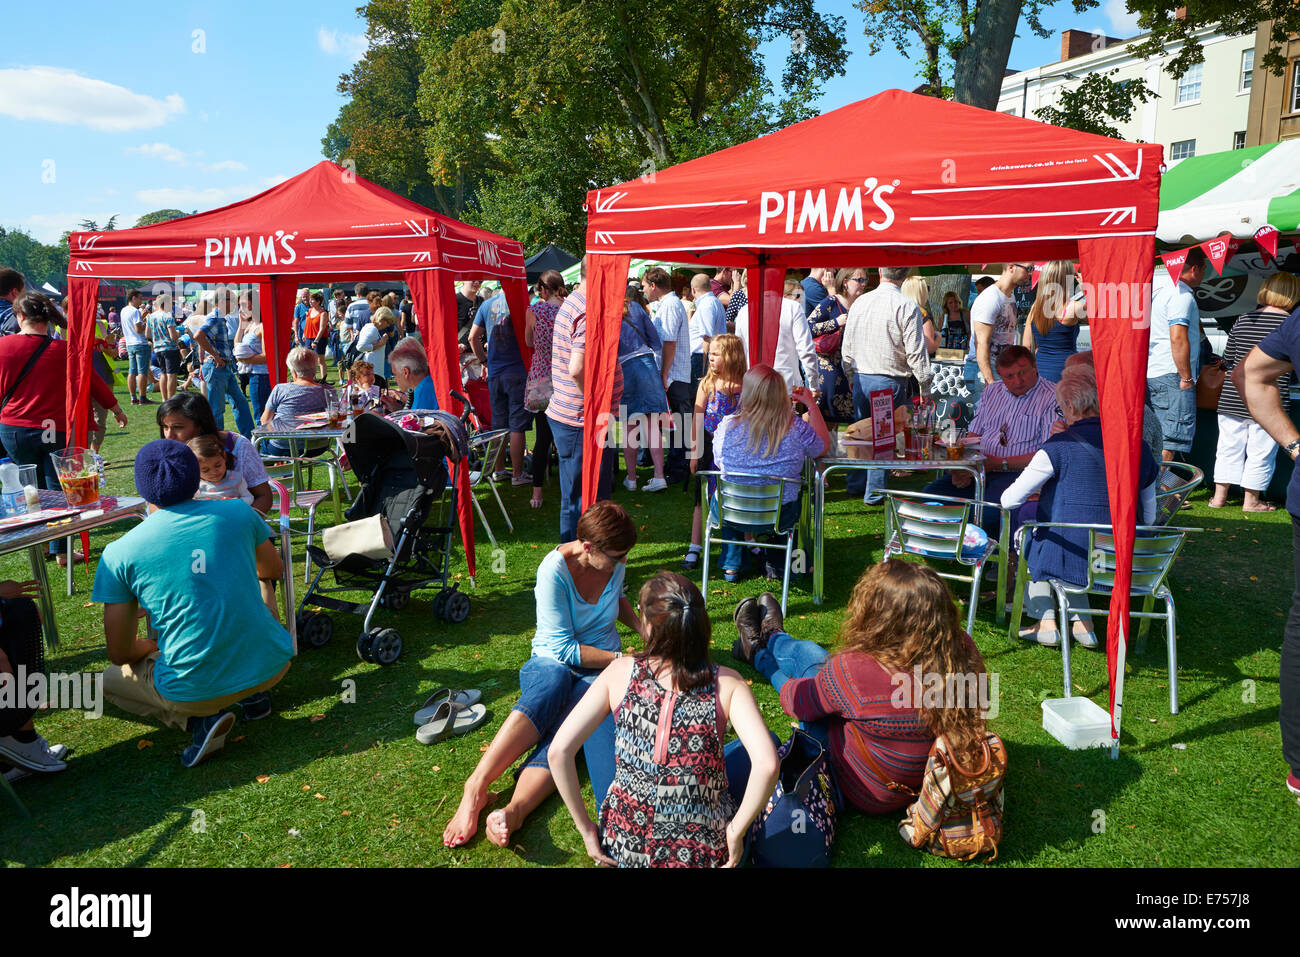 Pimm's Stall At The Food And Drink Festival Leamington Spa Warwickshire UK Stock Photo